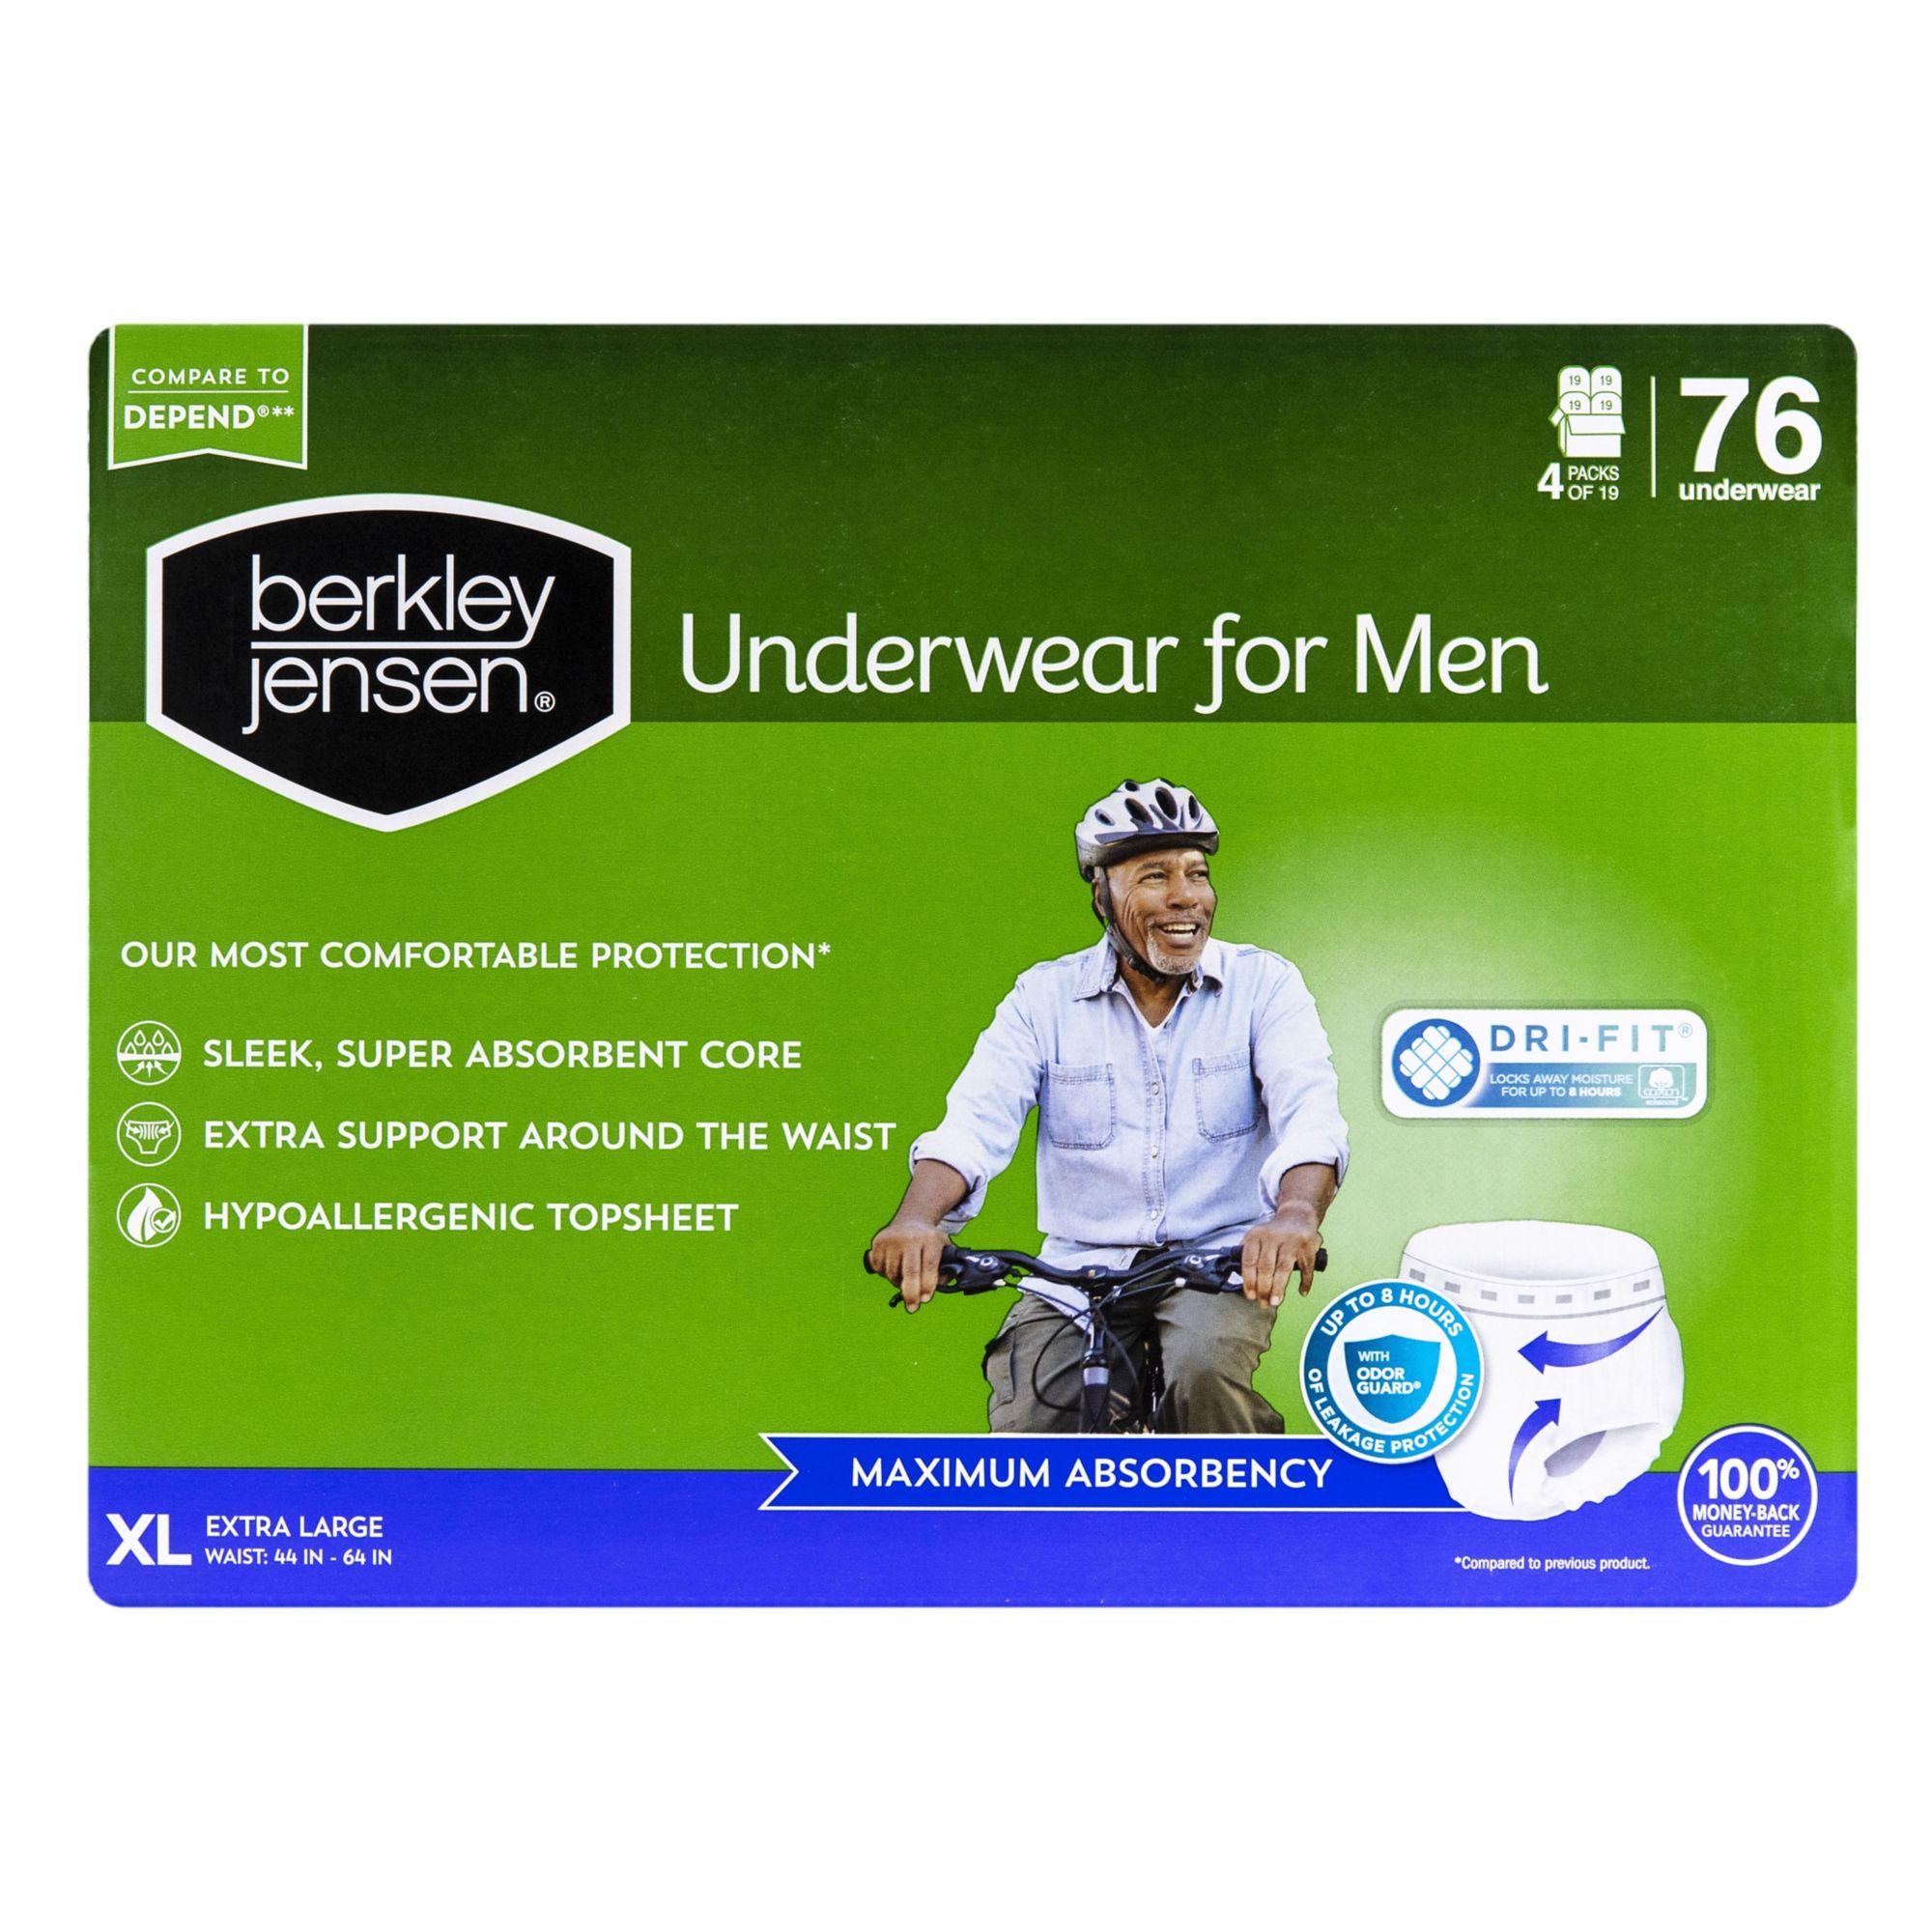 Depend Real Fit Maximum Absorbency Large/Extra Large Men Incontinence  Underwear, 20 ct - Gerbes Super Markets